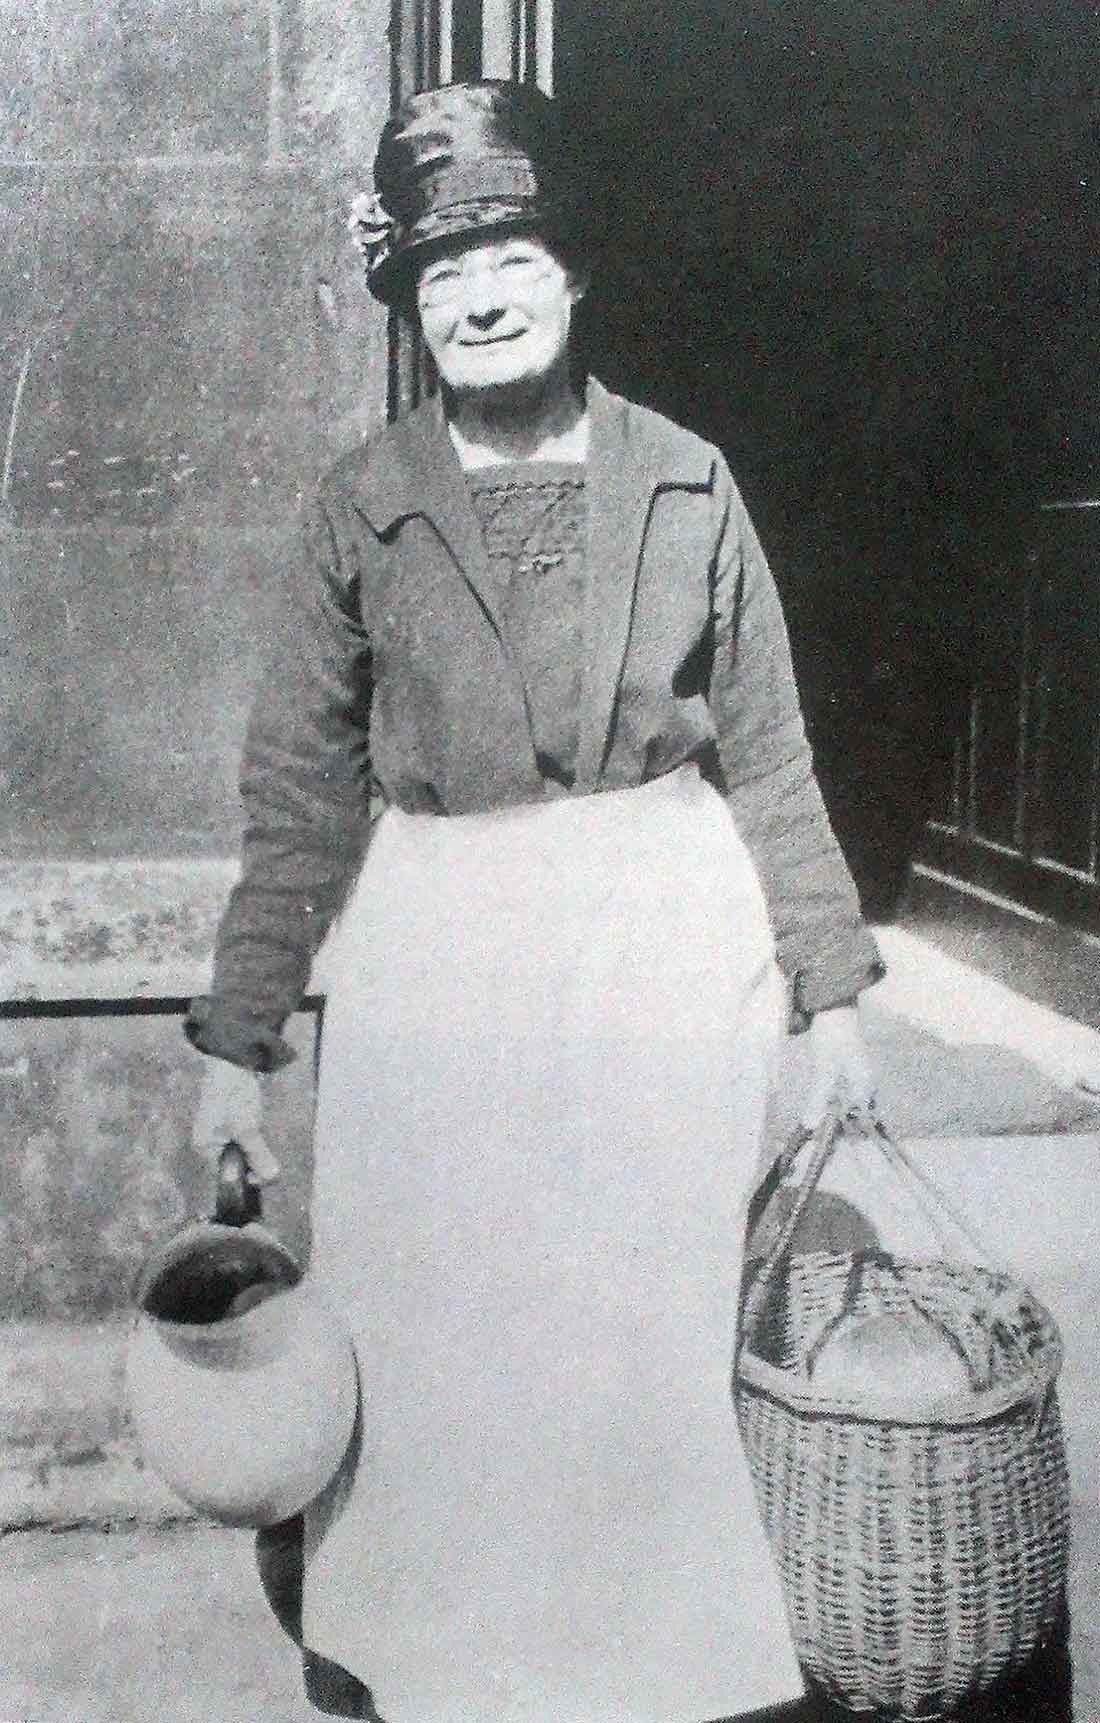 A member of Housekeeping staff in the 1920s